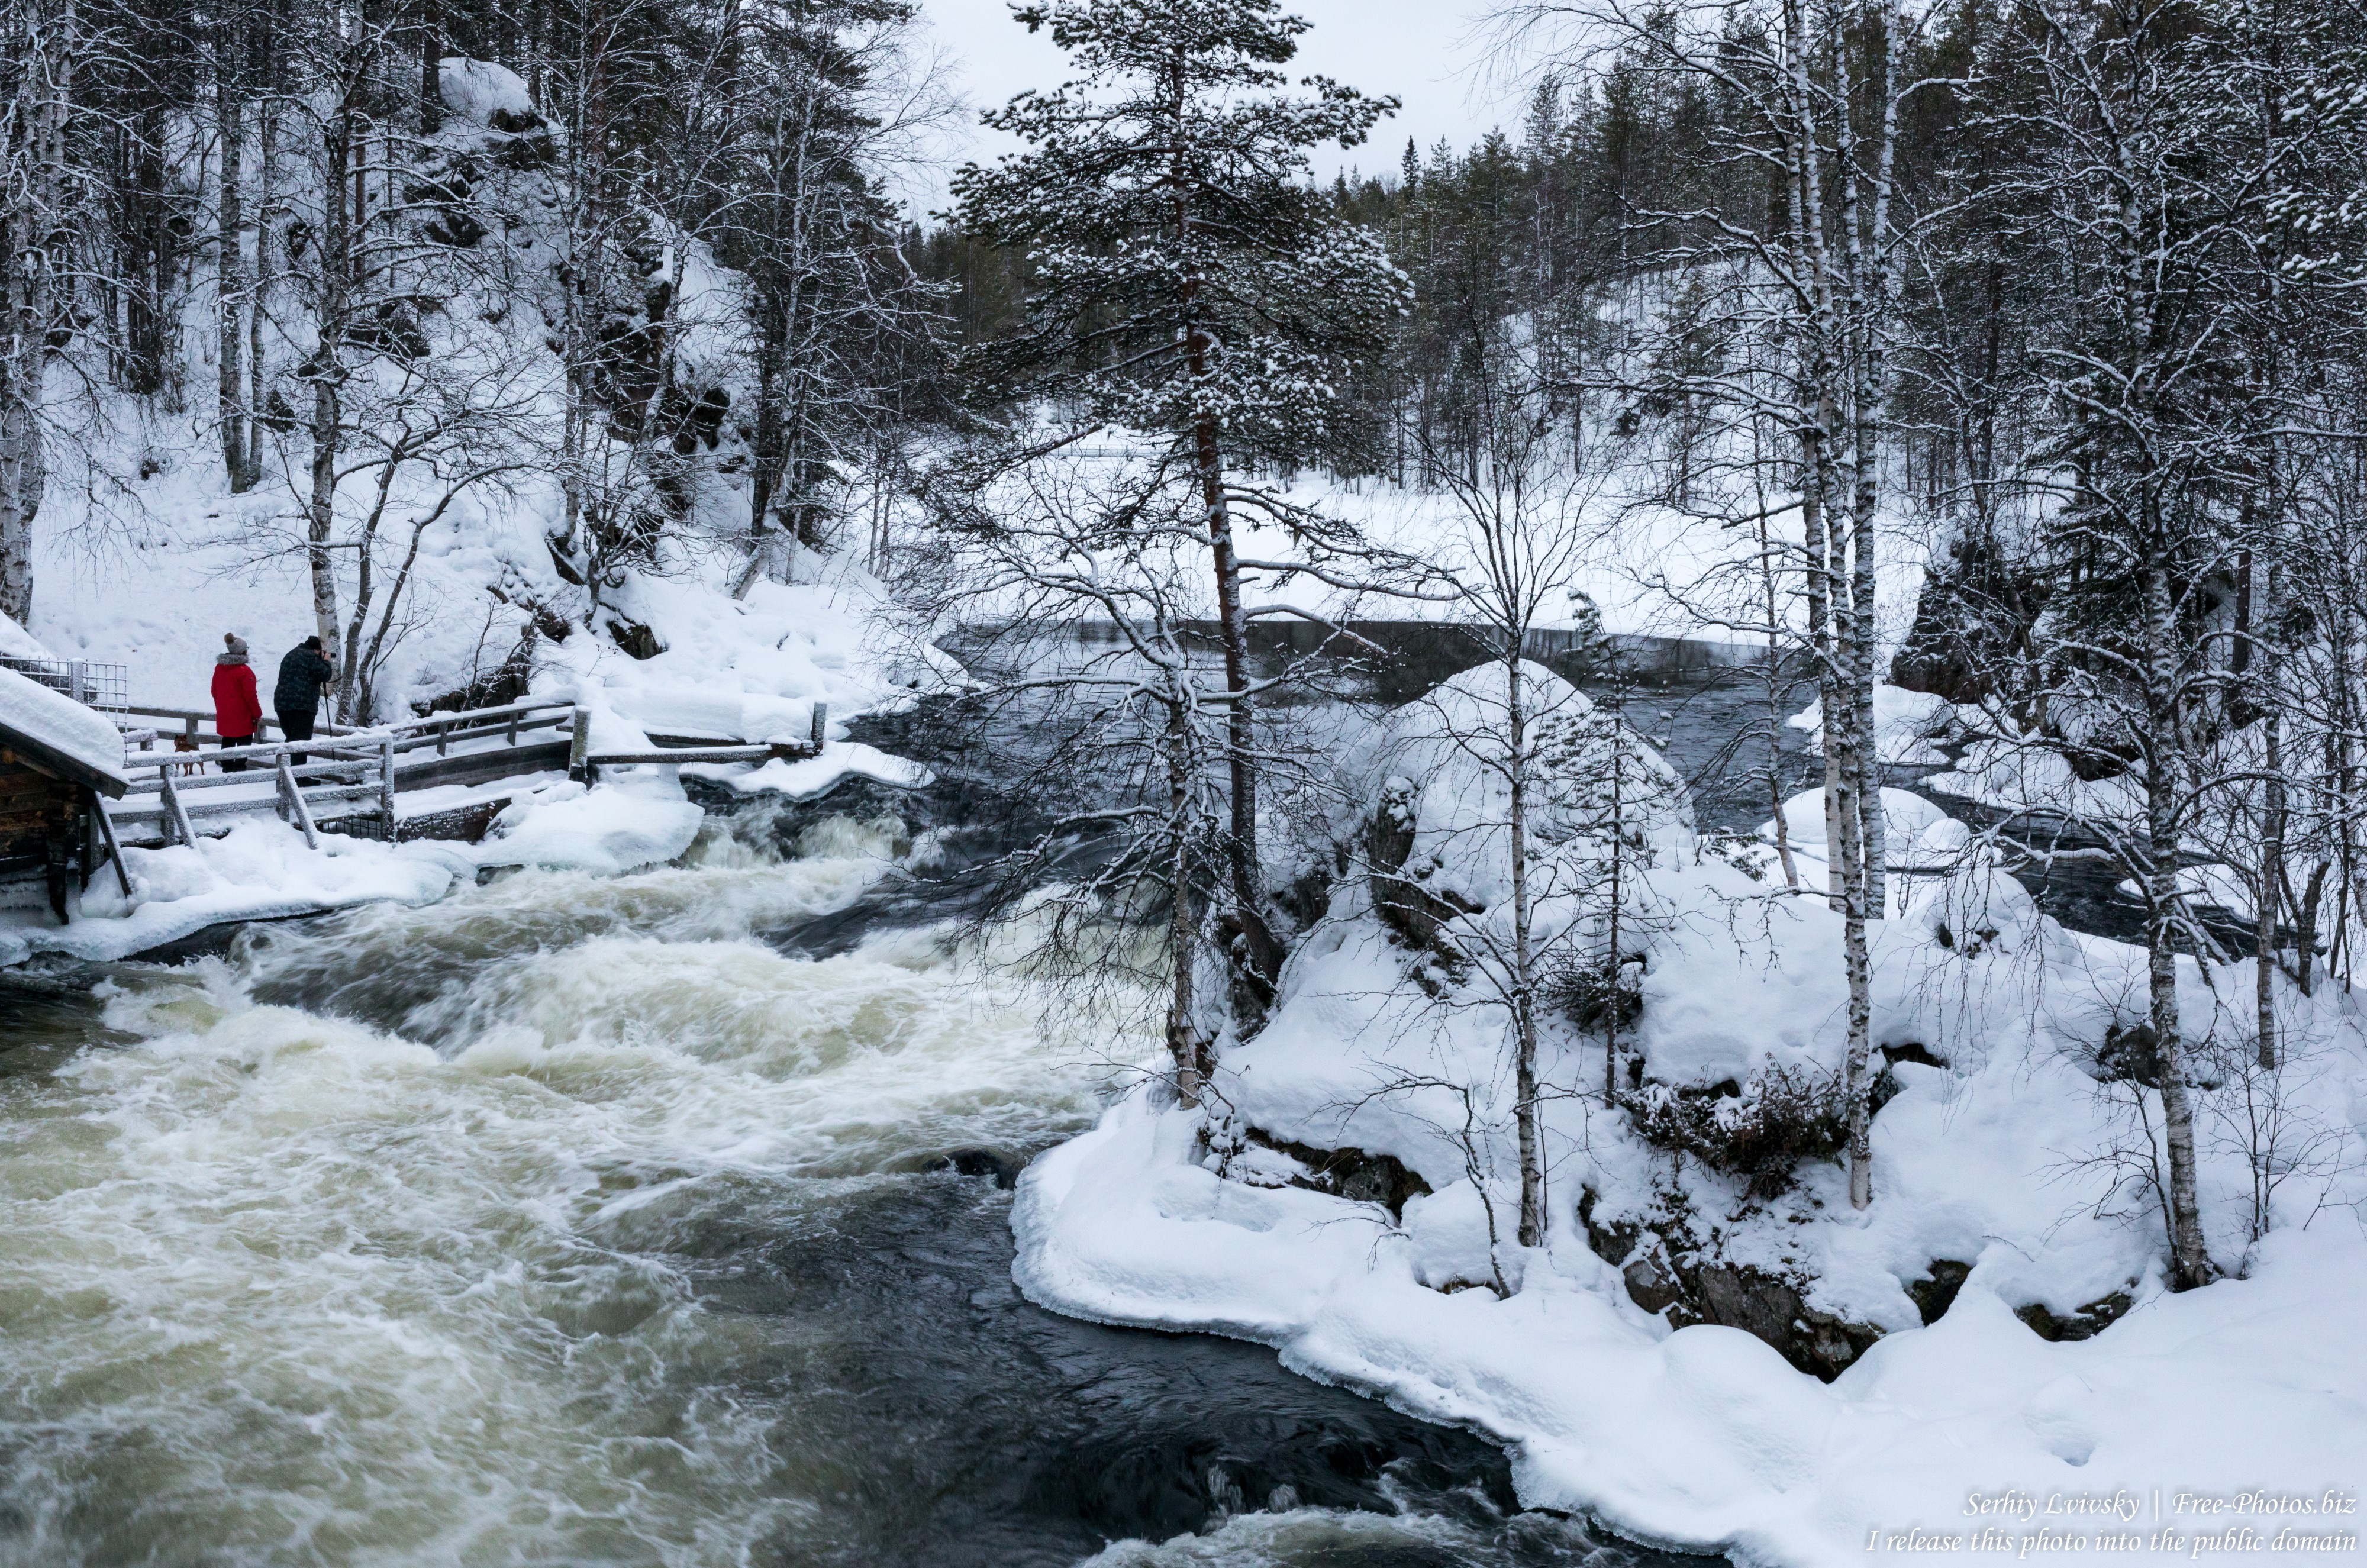 Oulanka, Finland, photographed in January 2020 by Serhiy Lvivsky, picture 2